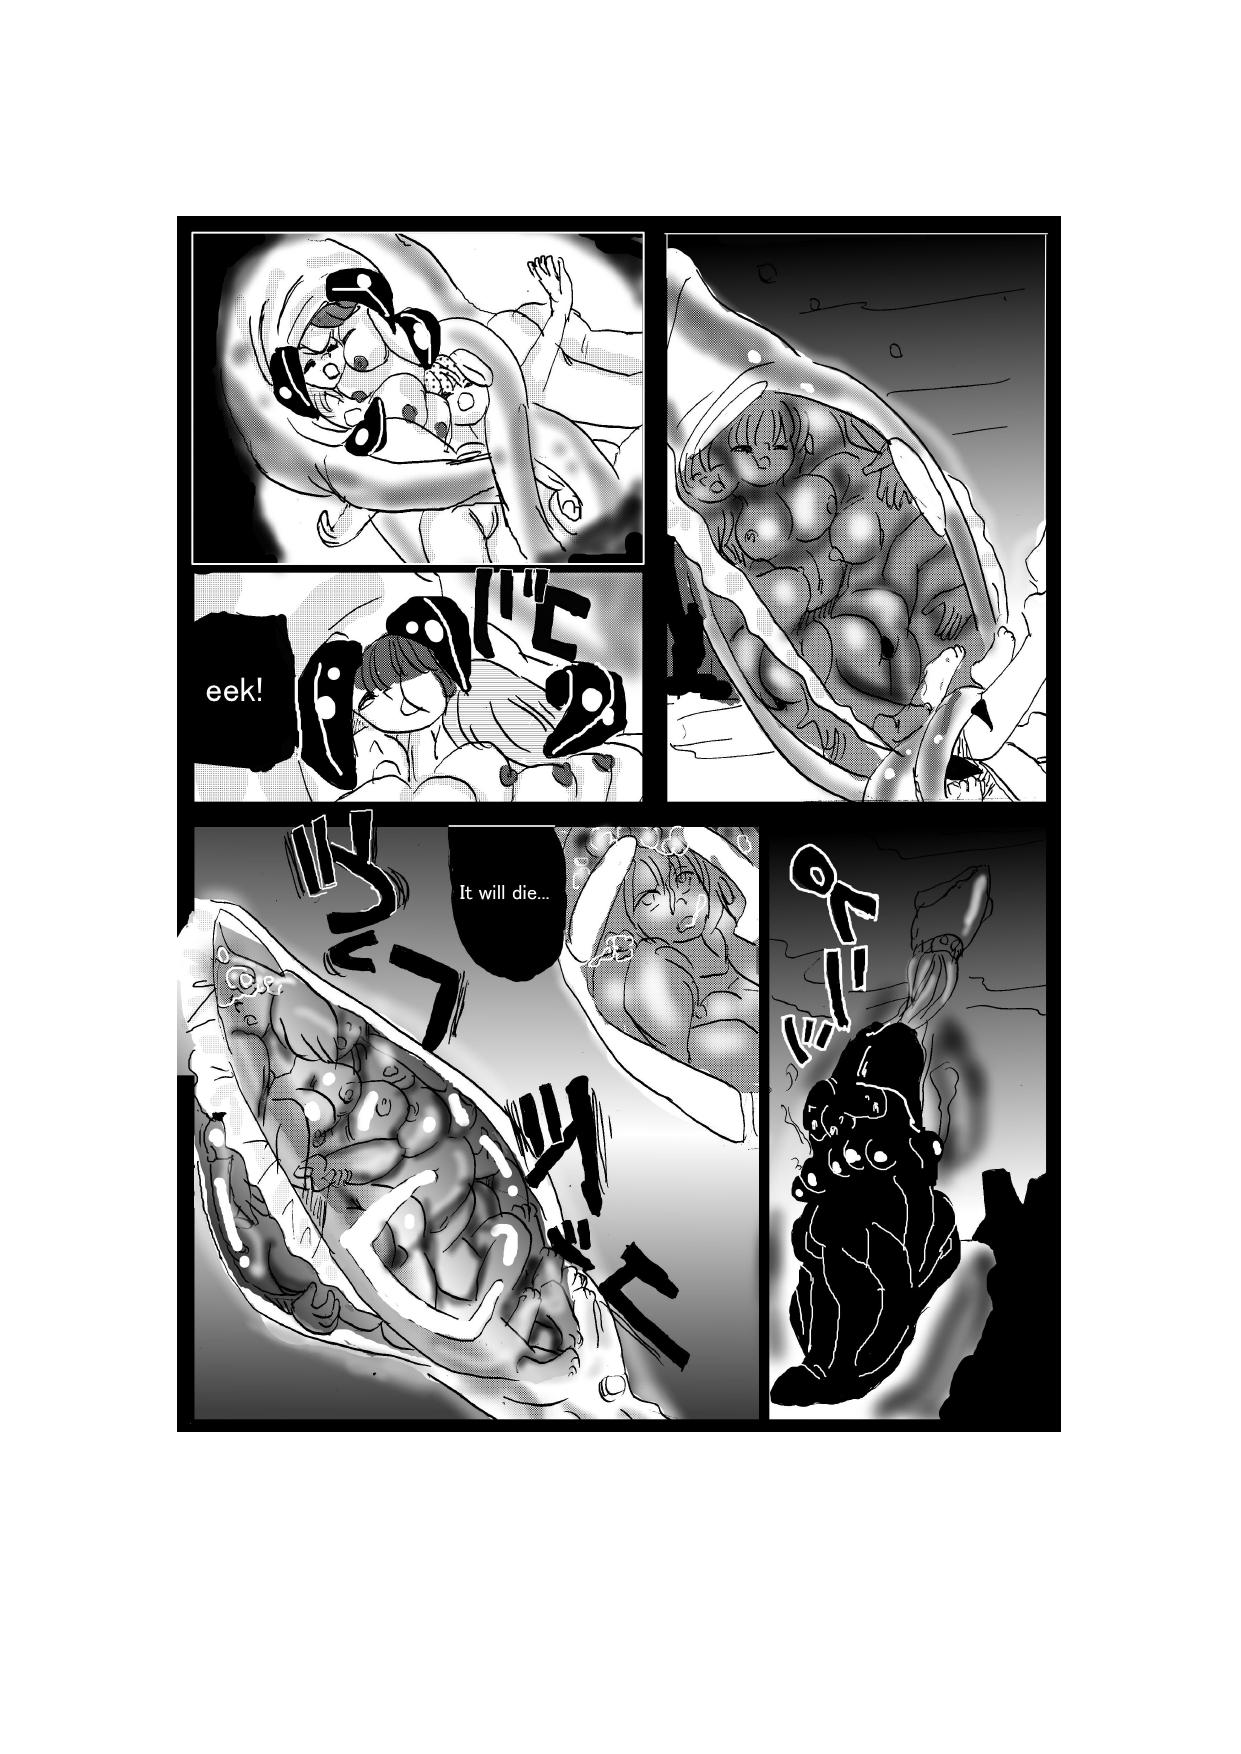 Perfect Body Porn [Mashiba Kenta (Stuka)] The Other Side of RPGs ~ Monster F*rm ~ Part 1 - Original Shower - Page 14